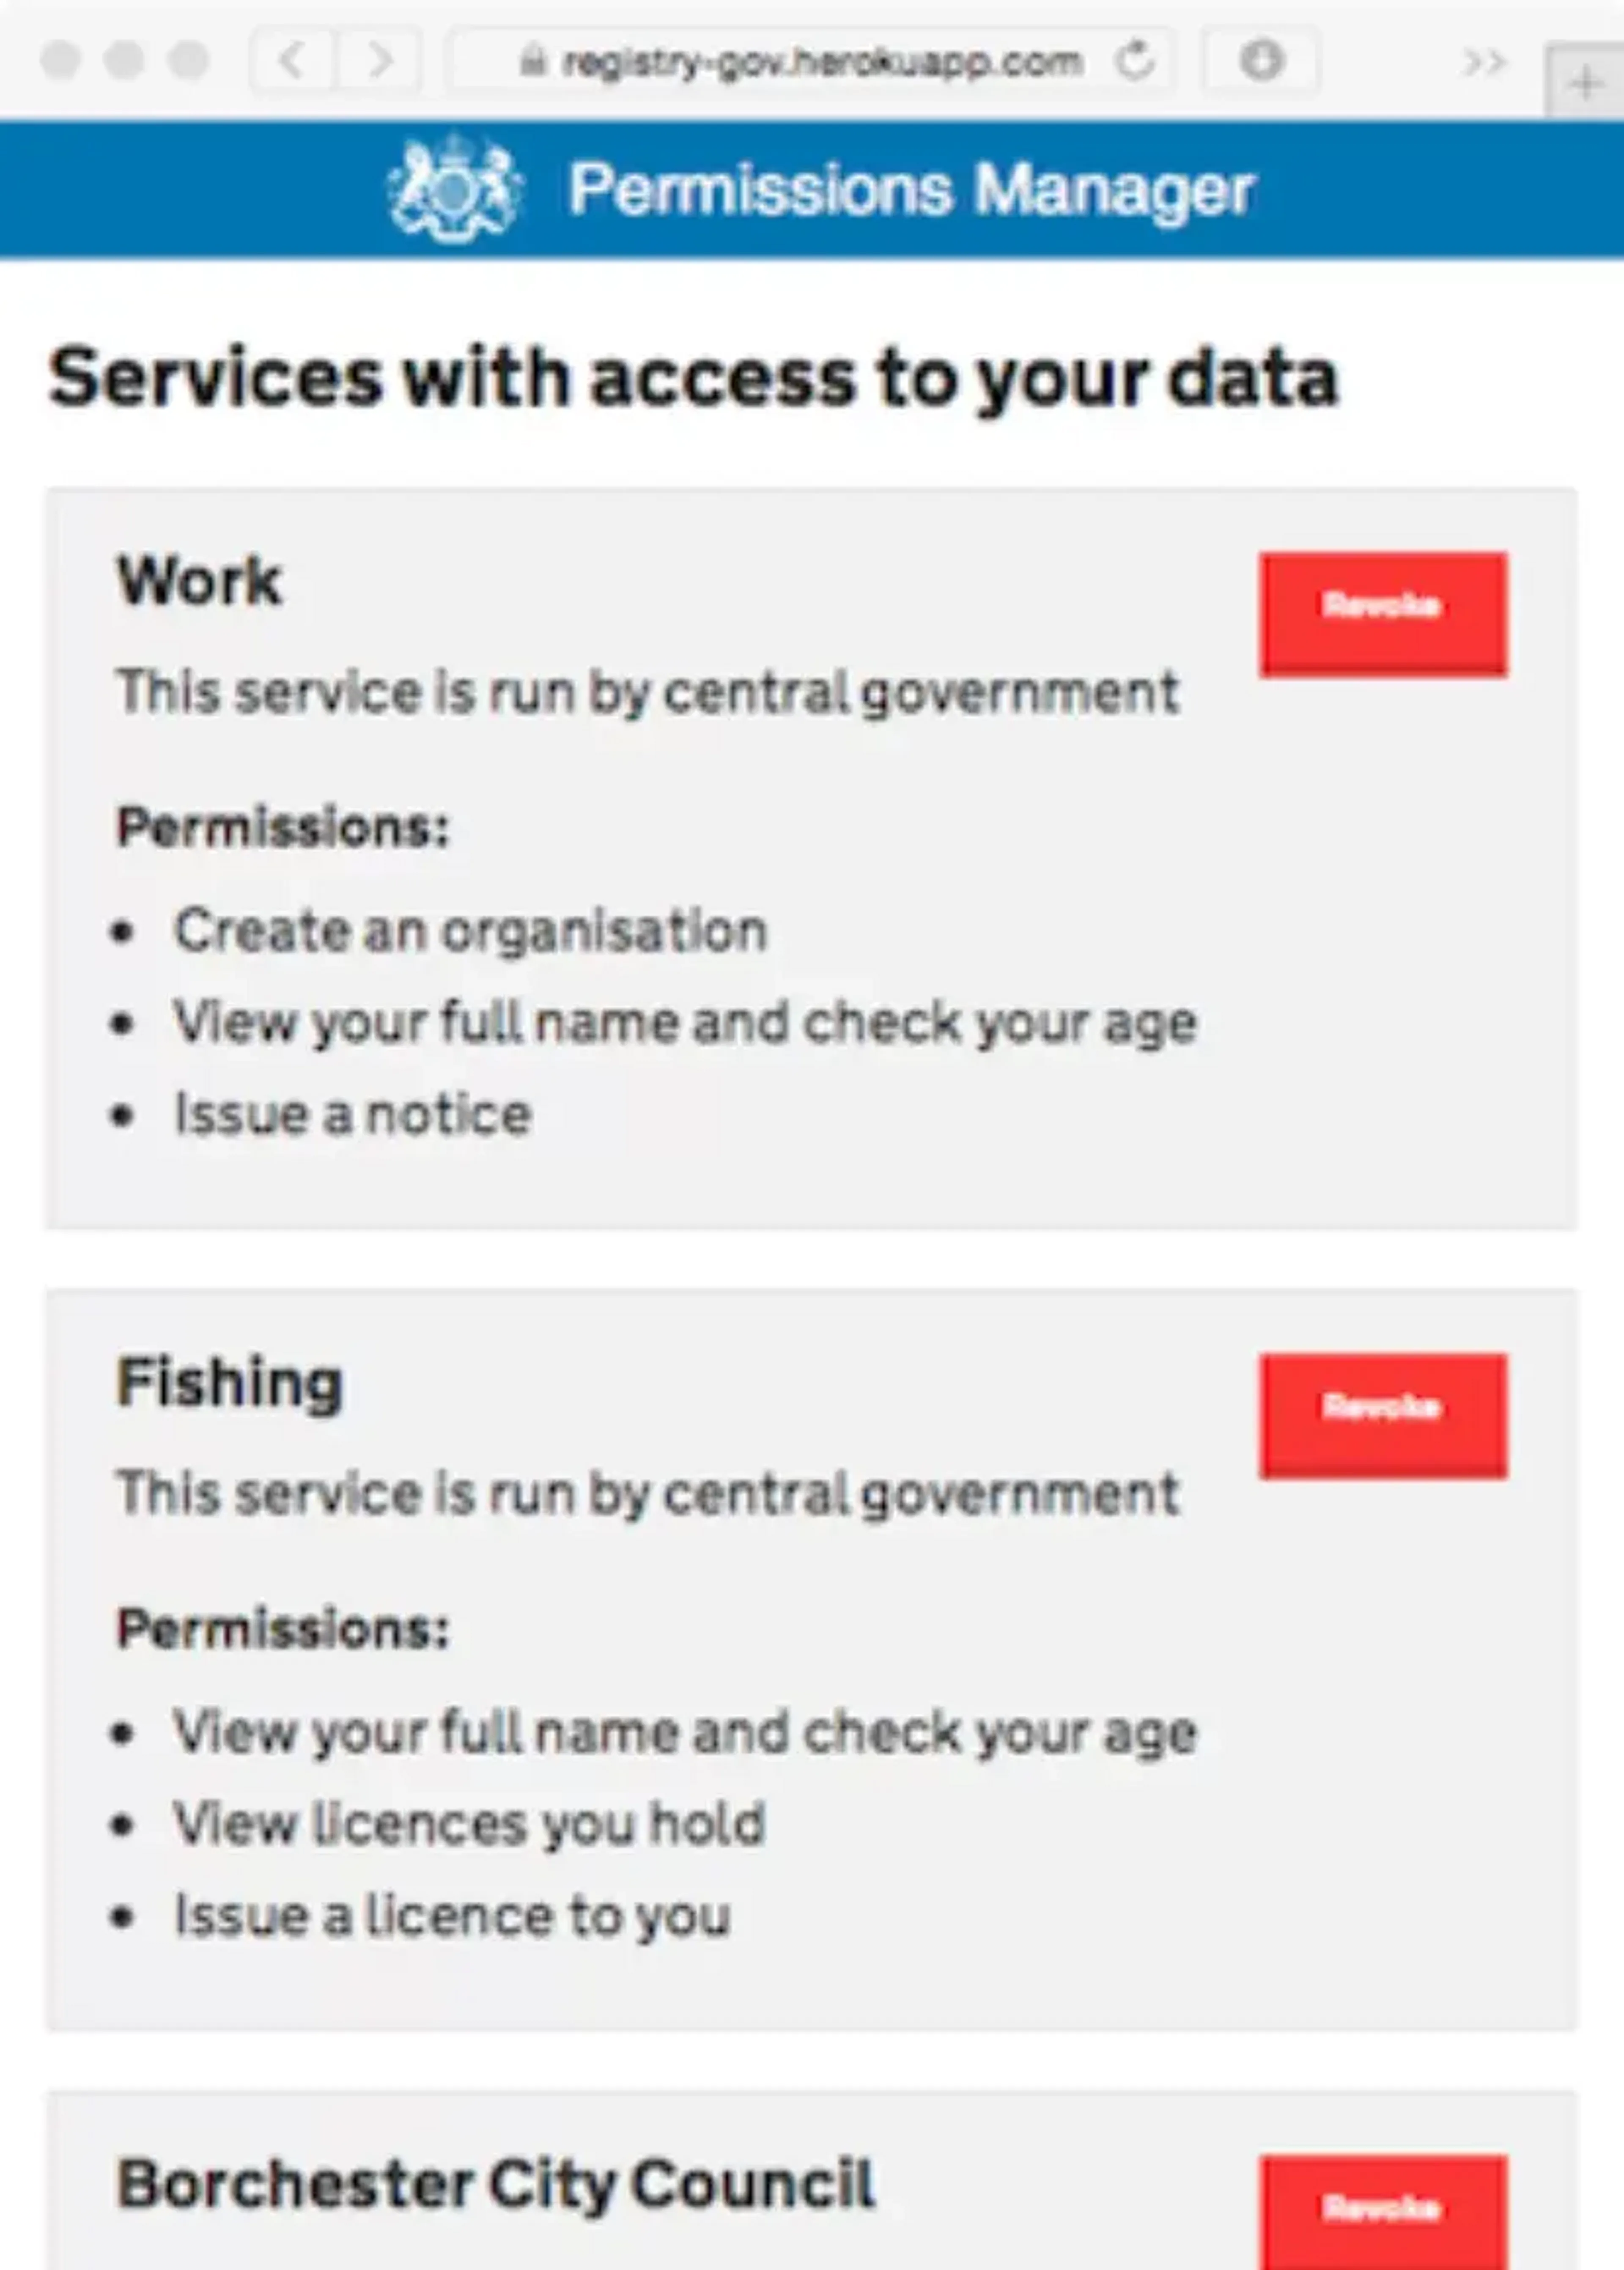 Access to data